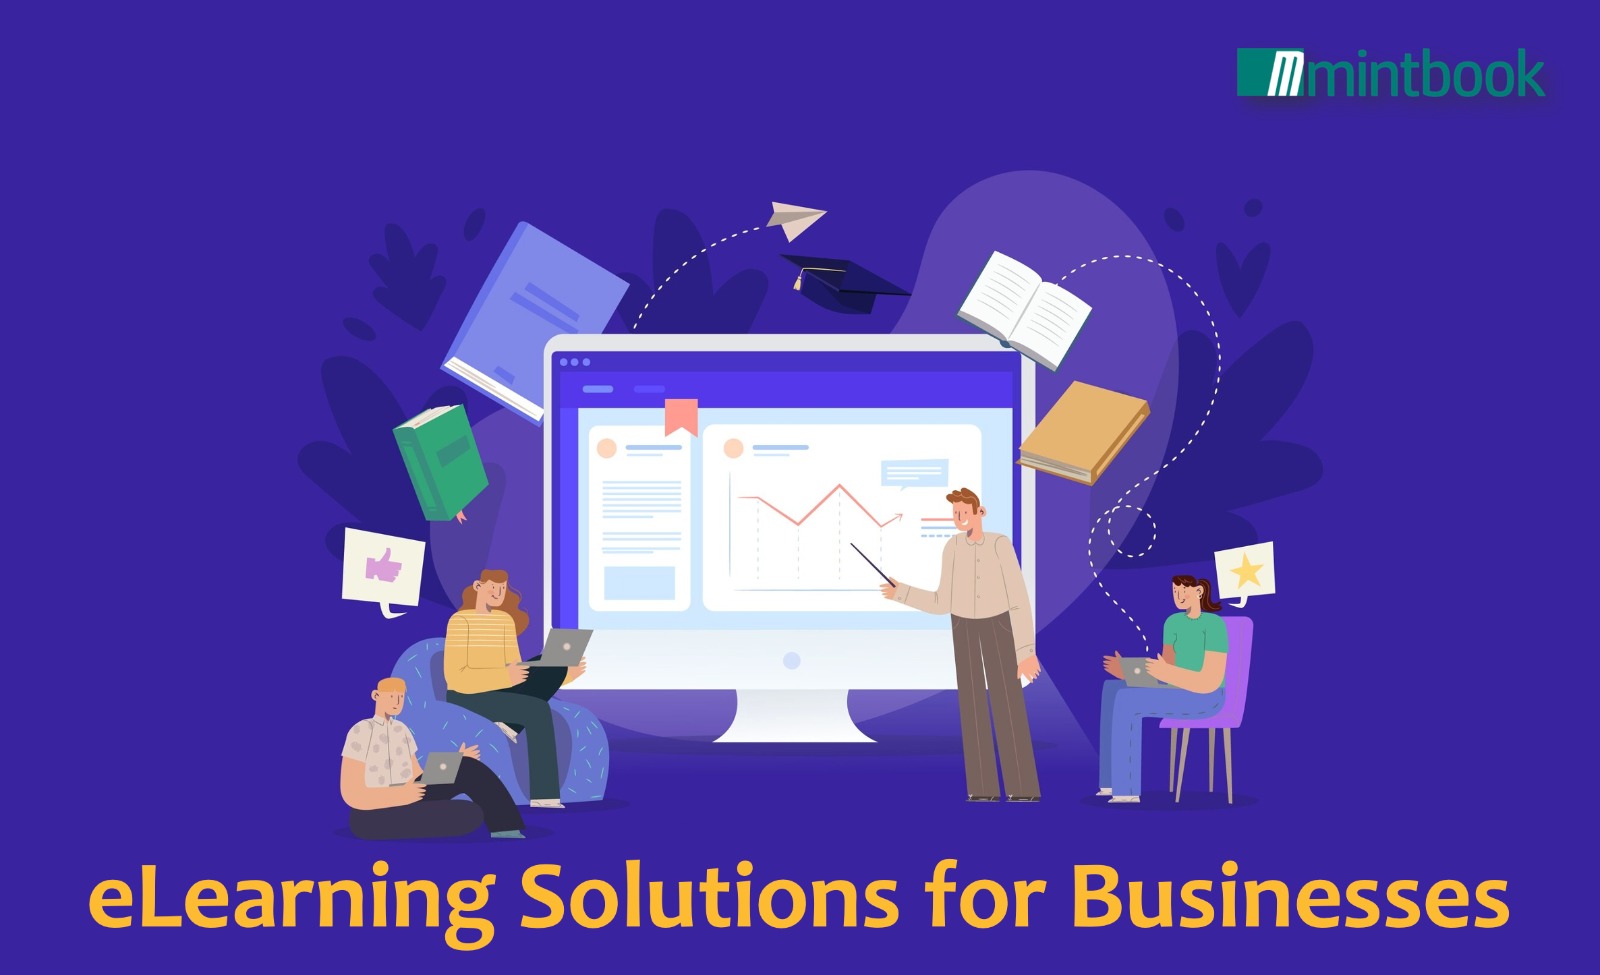 eLearning Solutions for Businesses